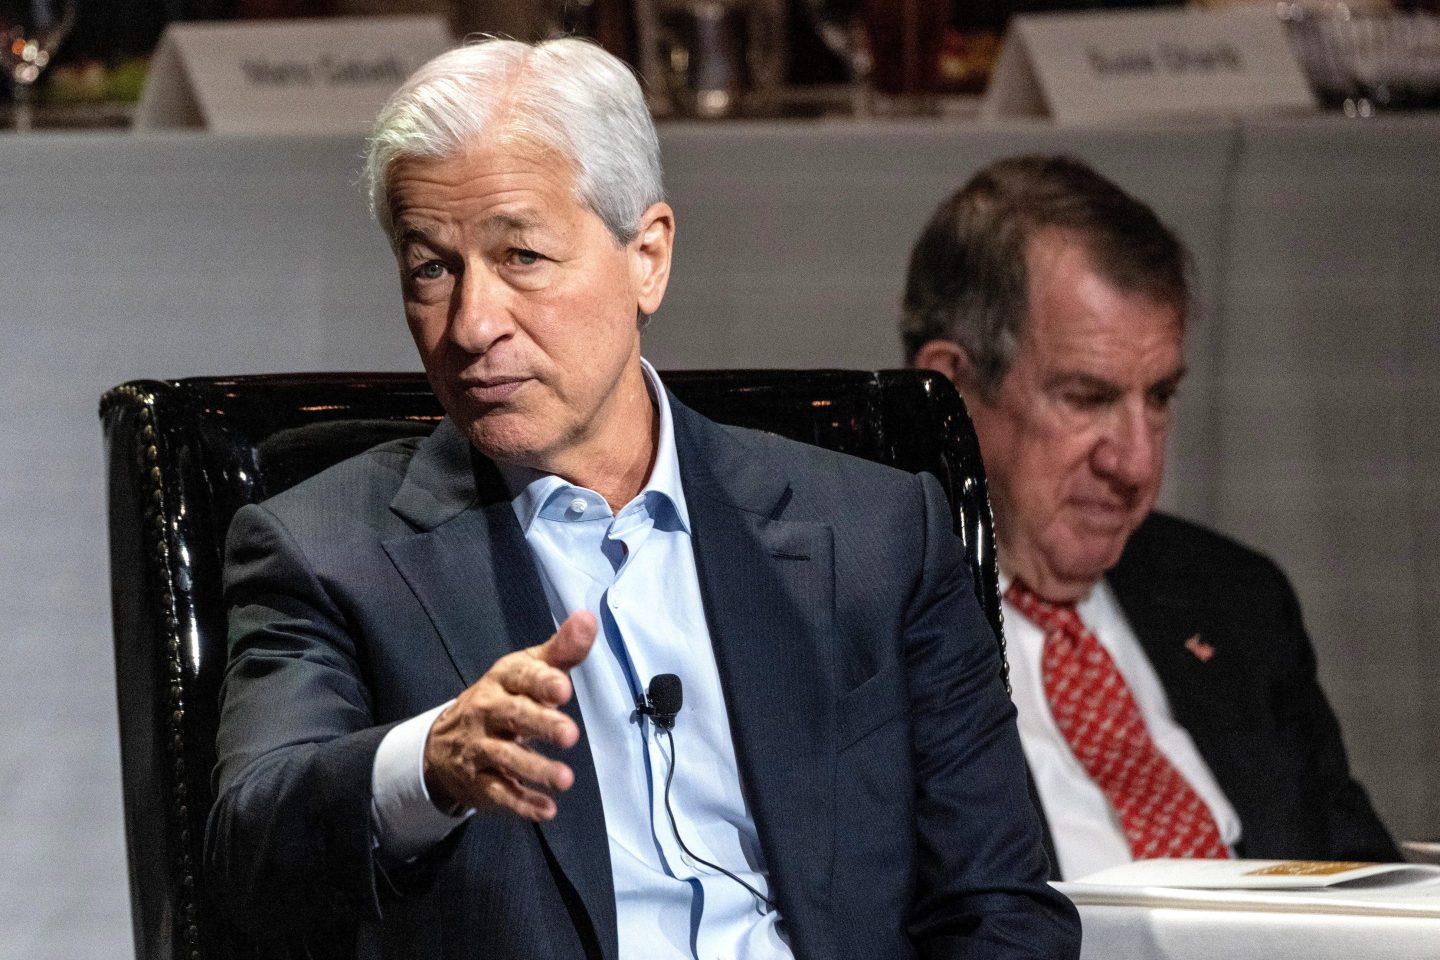 Jamie Dimon, chairman and chief executive officer of JPMorgan Chase &amp; Co., speaks during an Economic Club of New York (ECNY) event in New York, US, on Tuesday, April 23, 2024. Dimon met with executives from the World Bank Group and several other multilateral development lenders recently as they seek to pull more private money into initiatives across emerging markets. Photographer: Victor J. Blue/Bloomberg via Getty Images